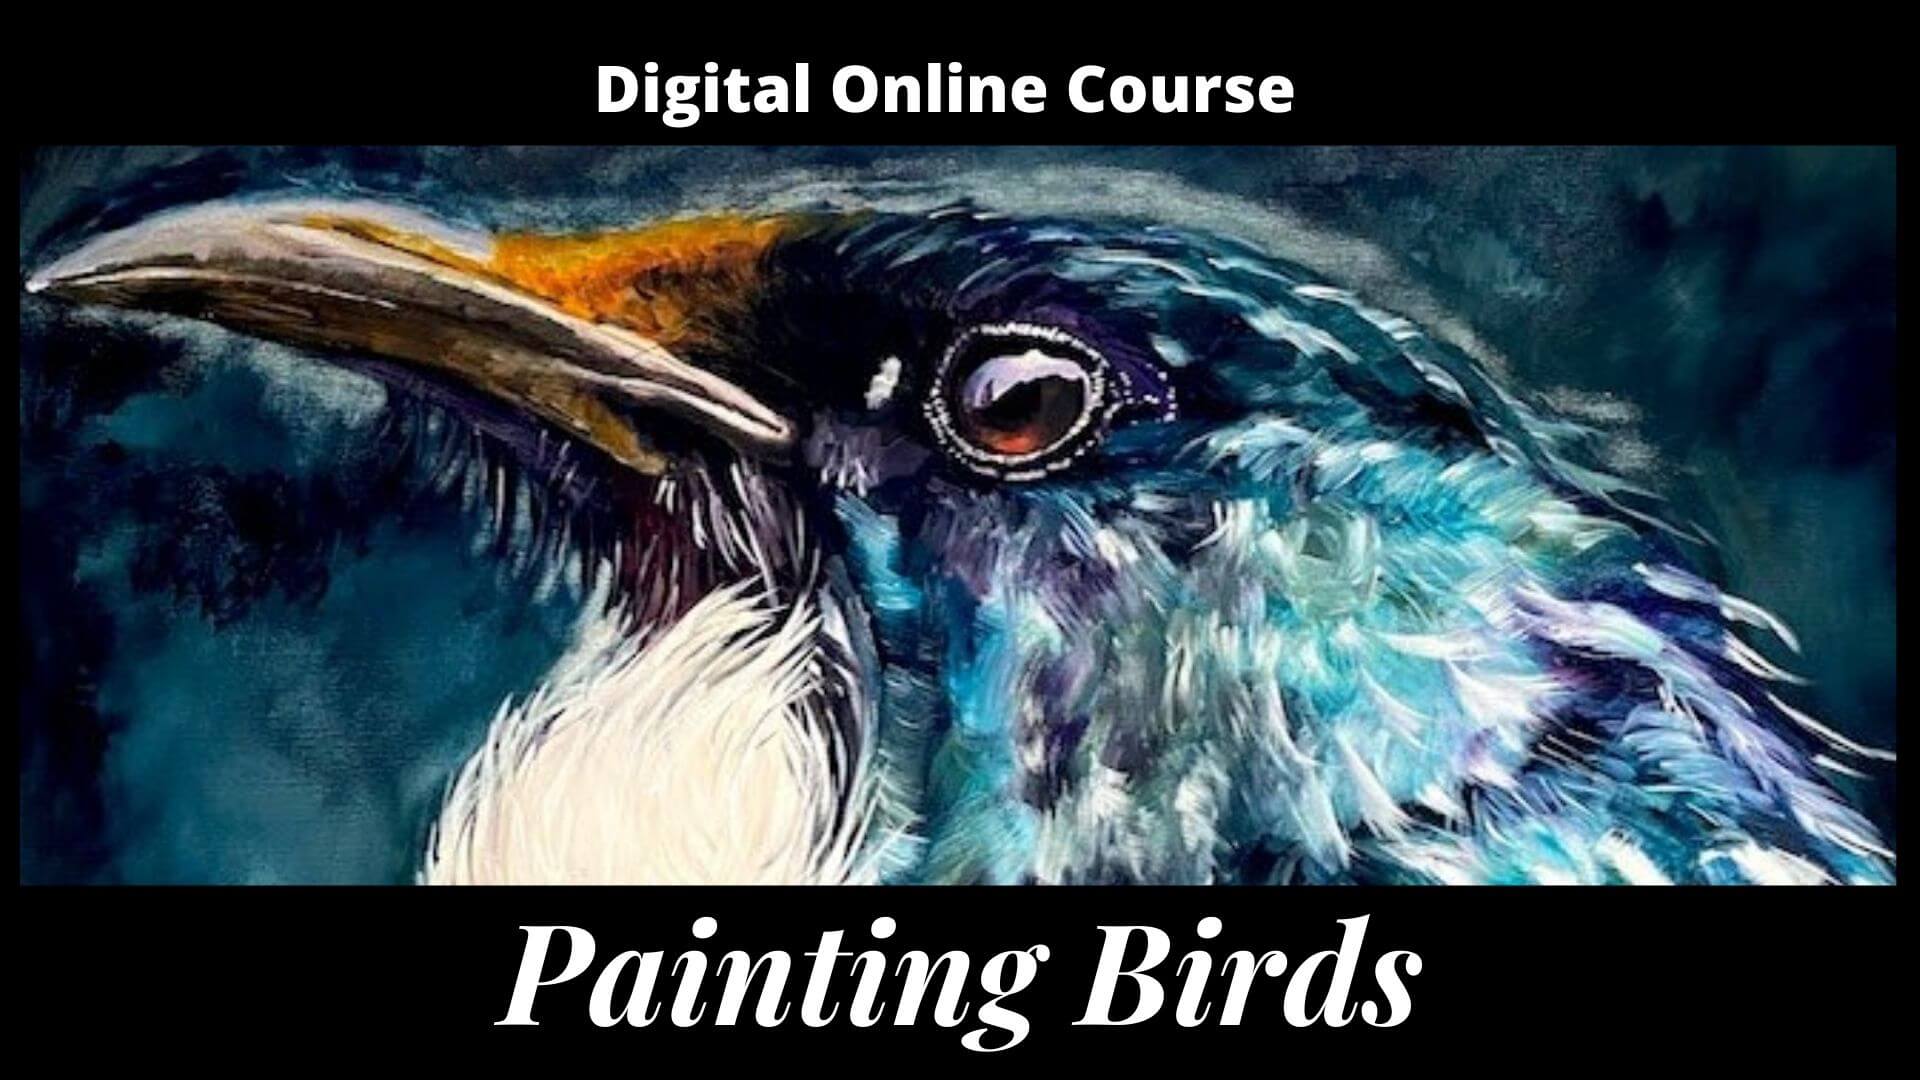 Painting-birds-tile-landing-page